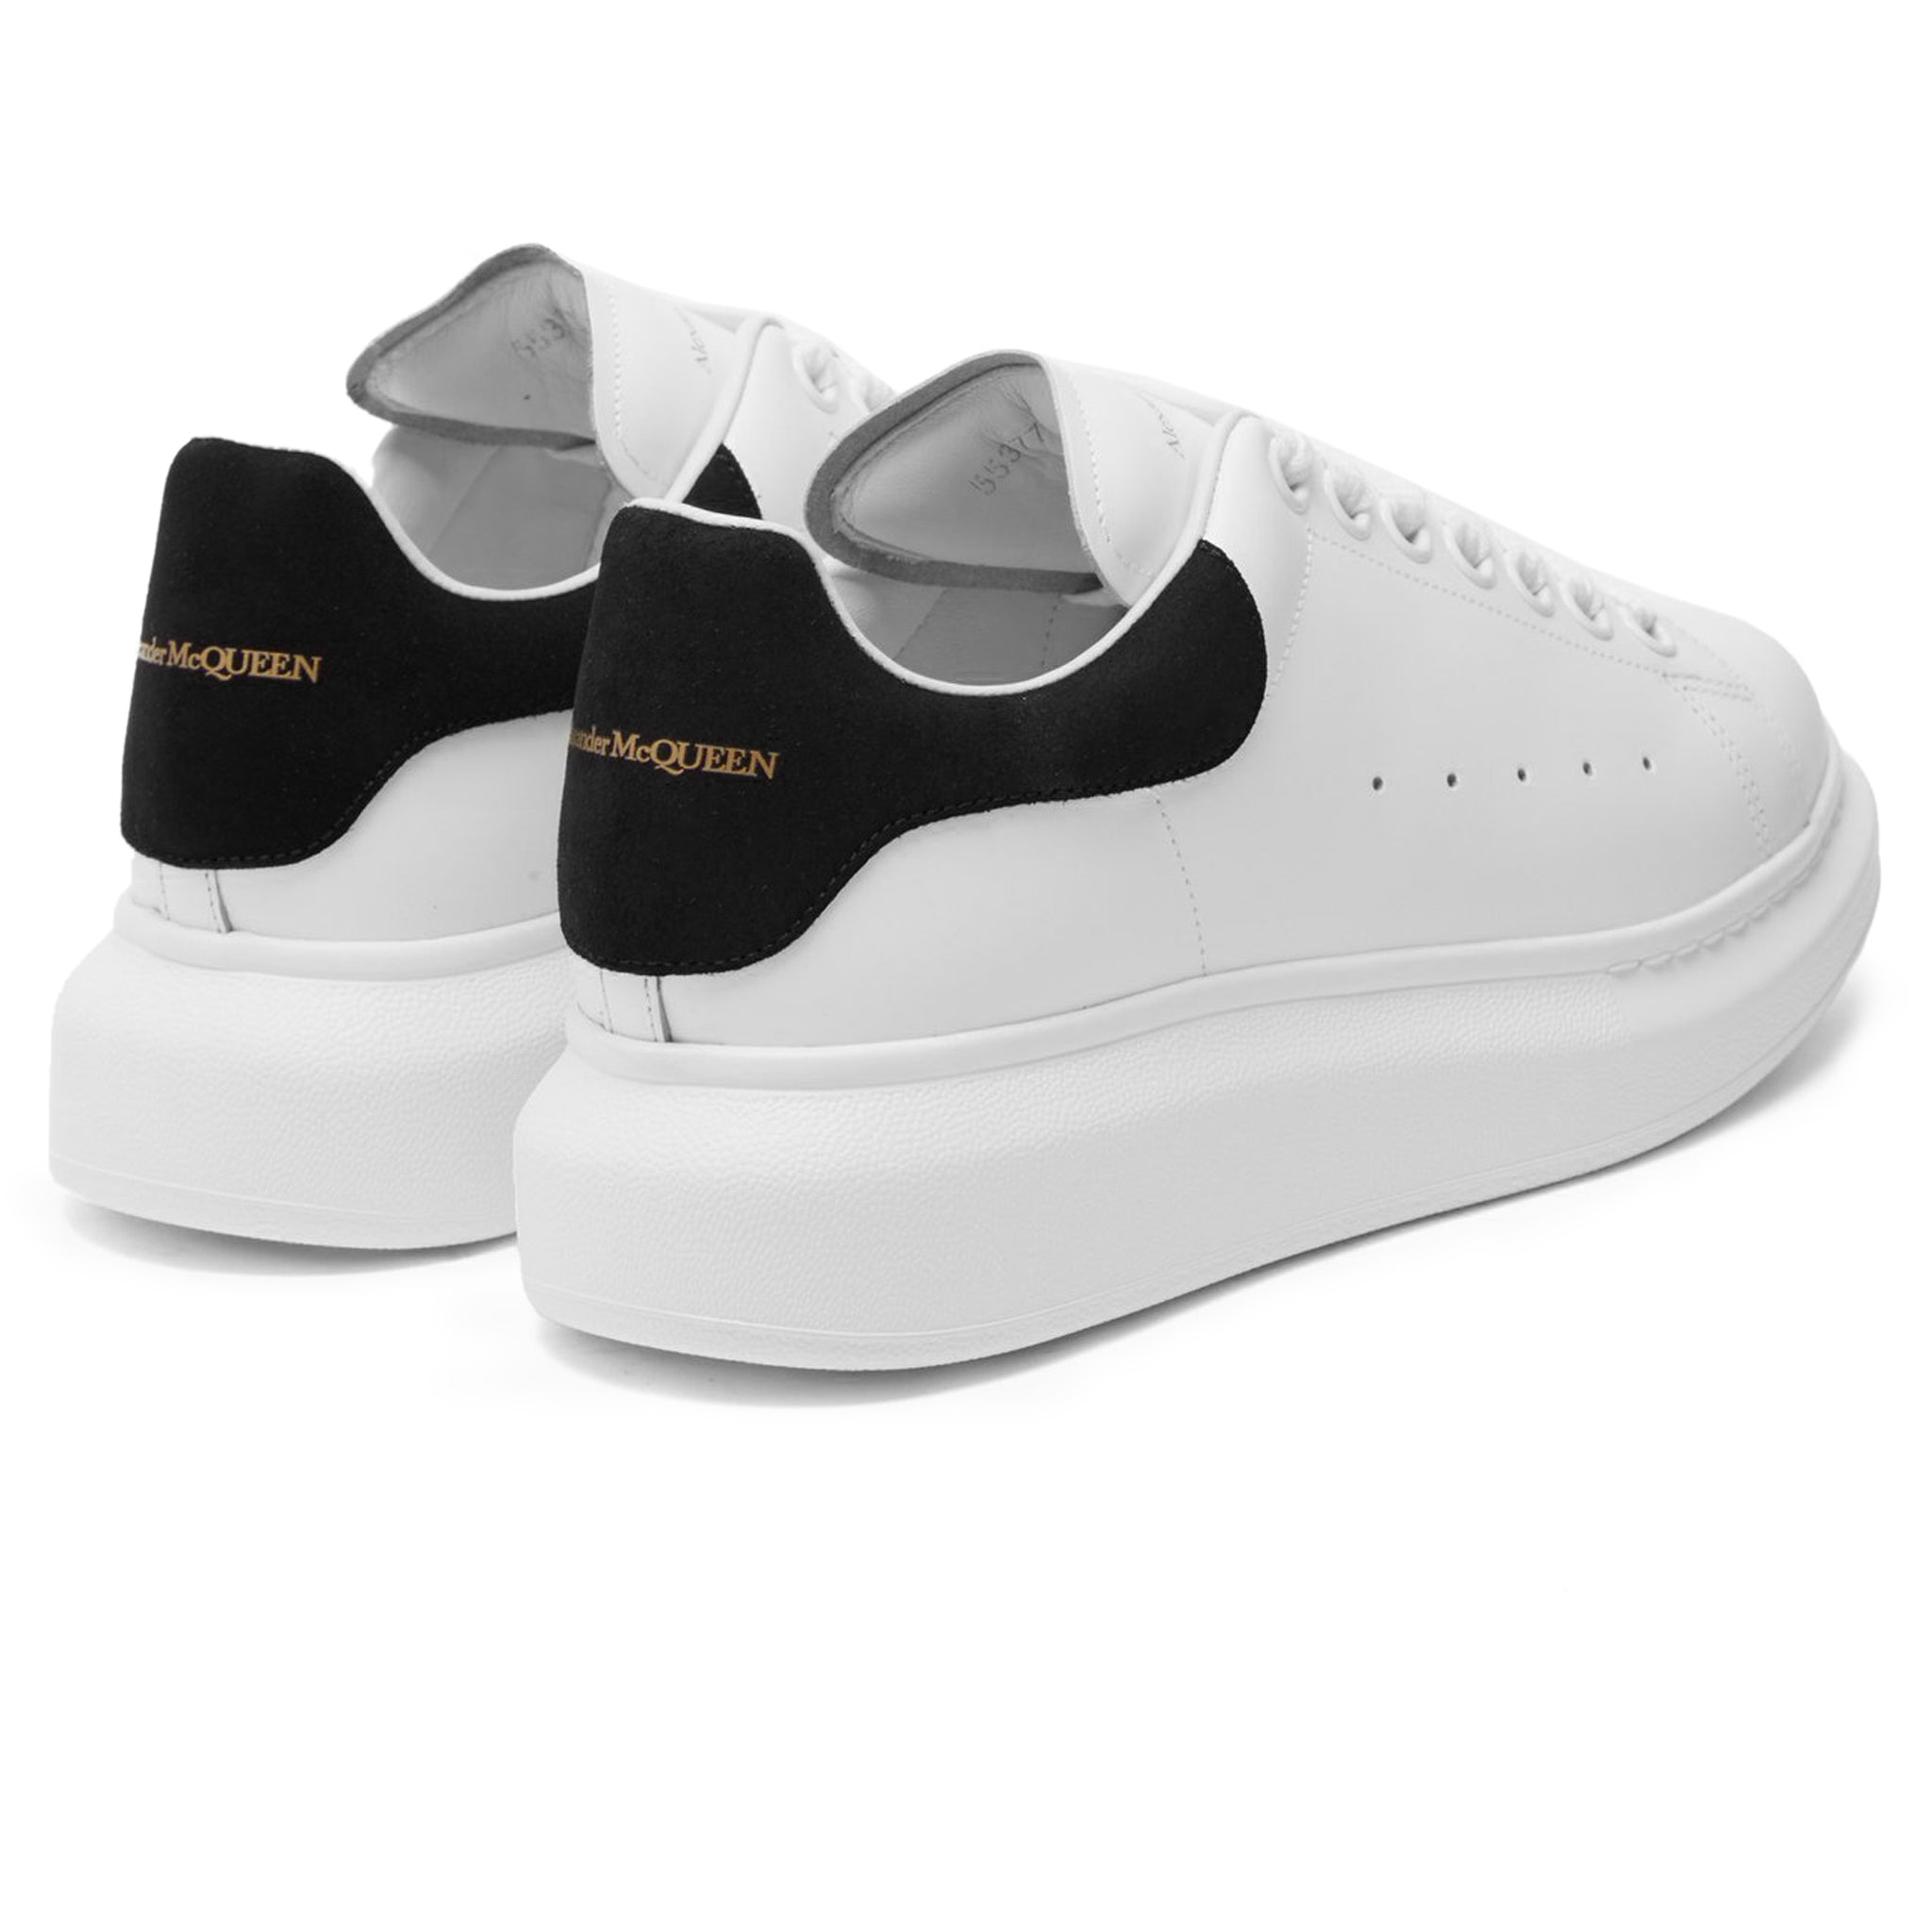 Back view of Alexander Mcqueen Raised Sole White Black Suede Sneaker